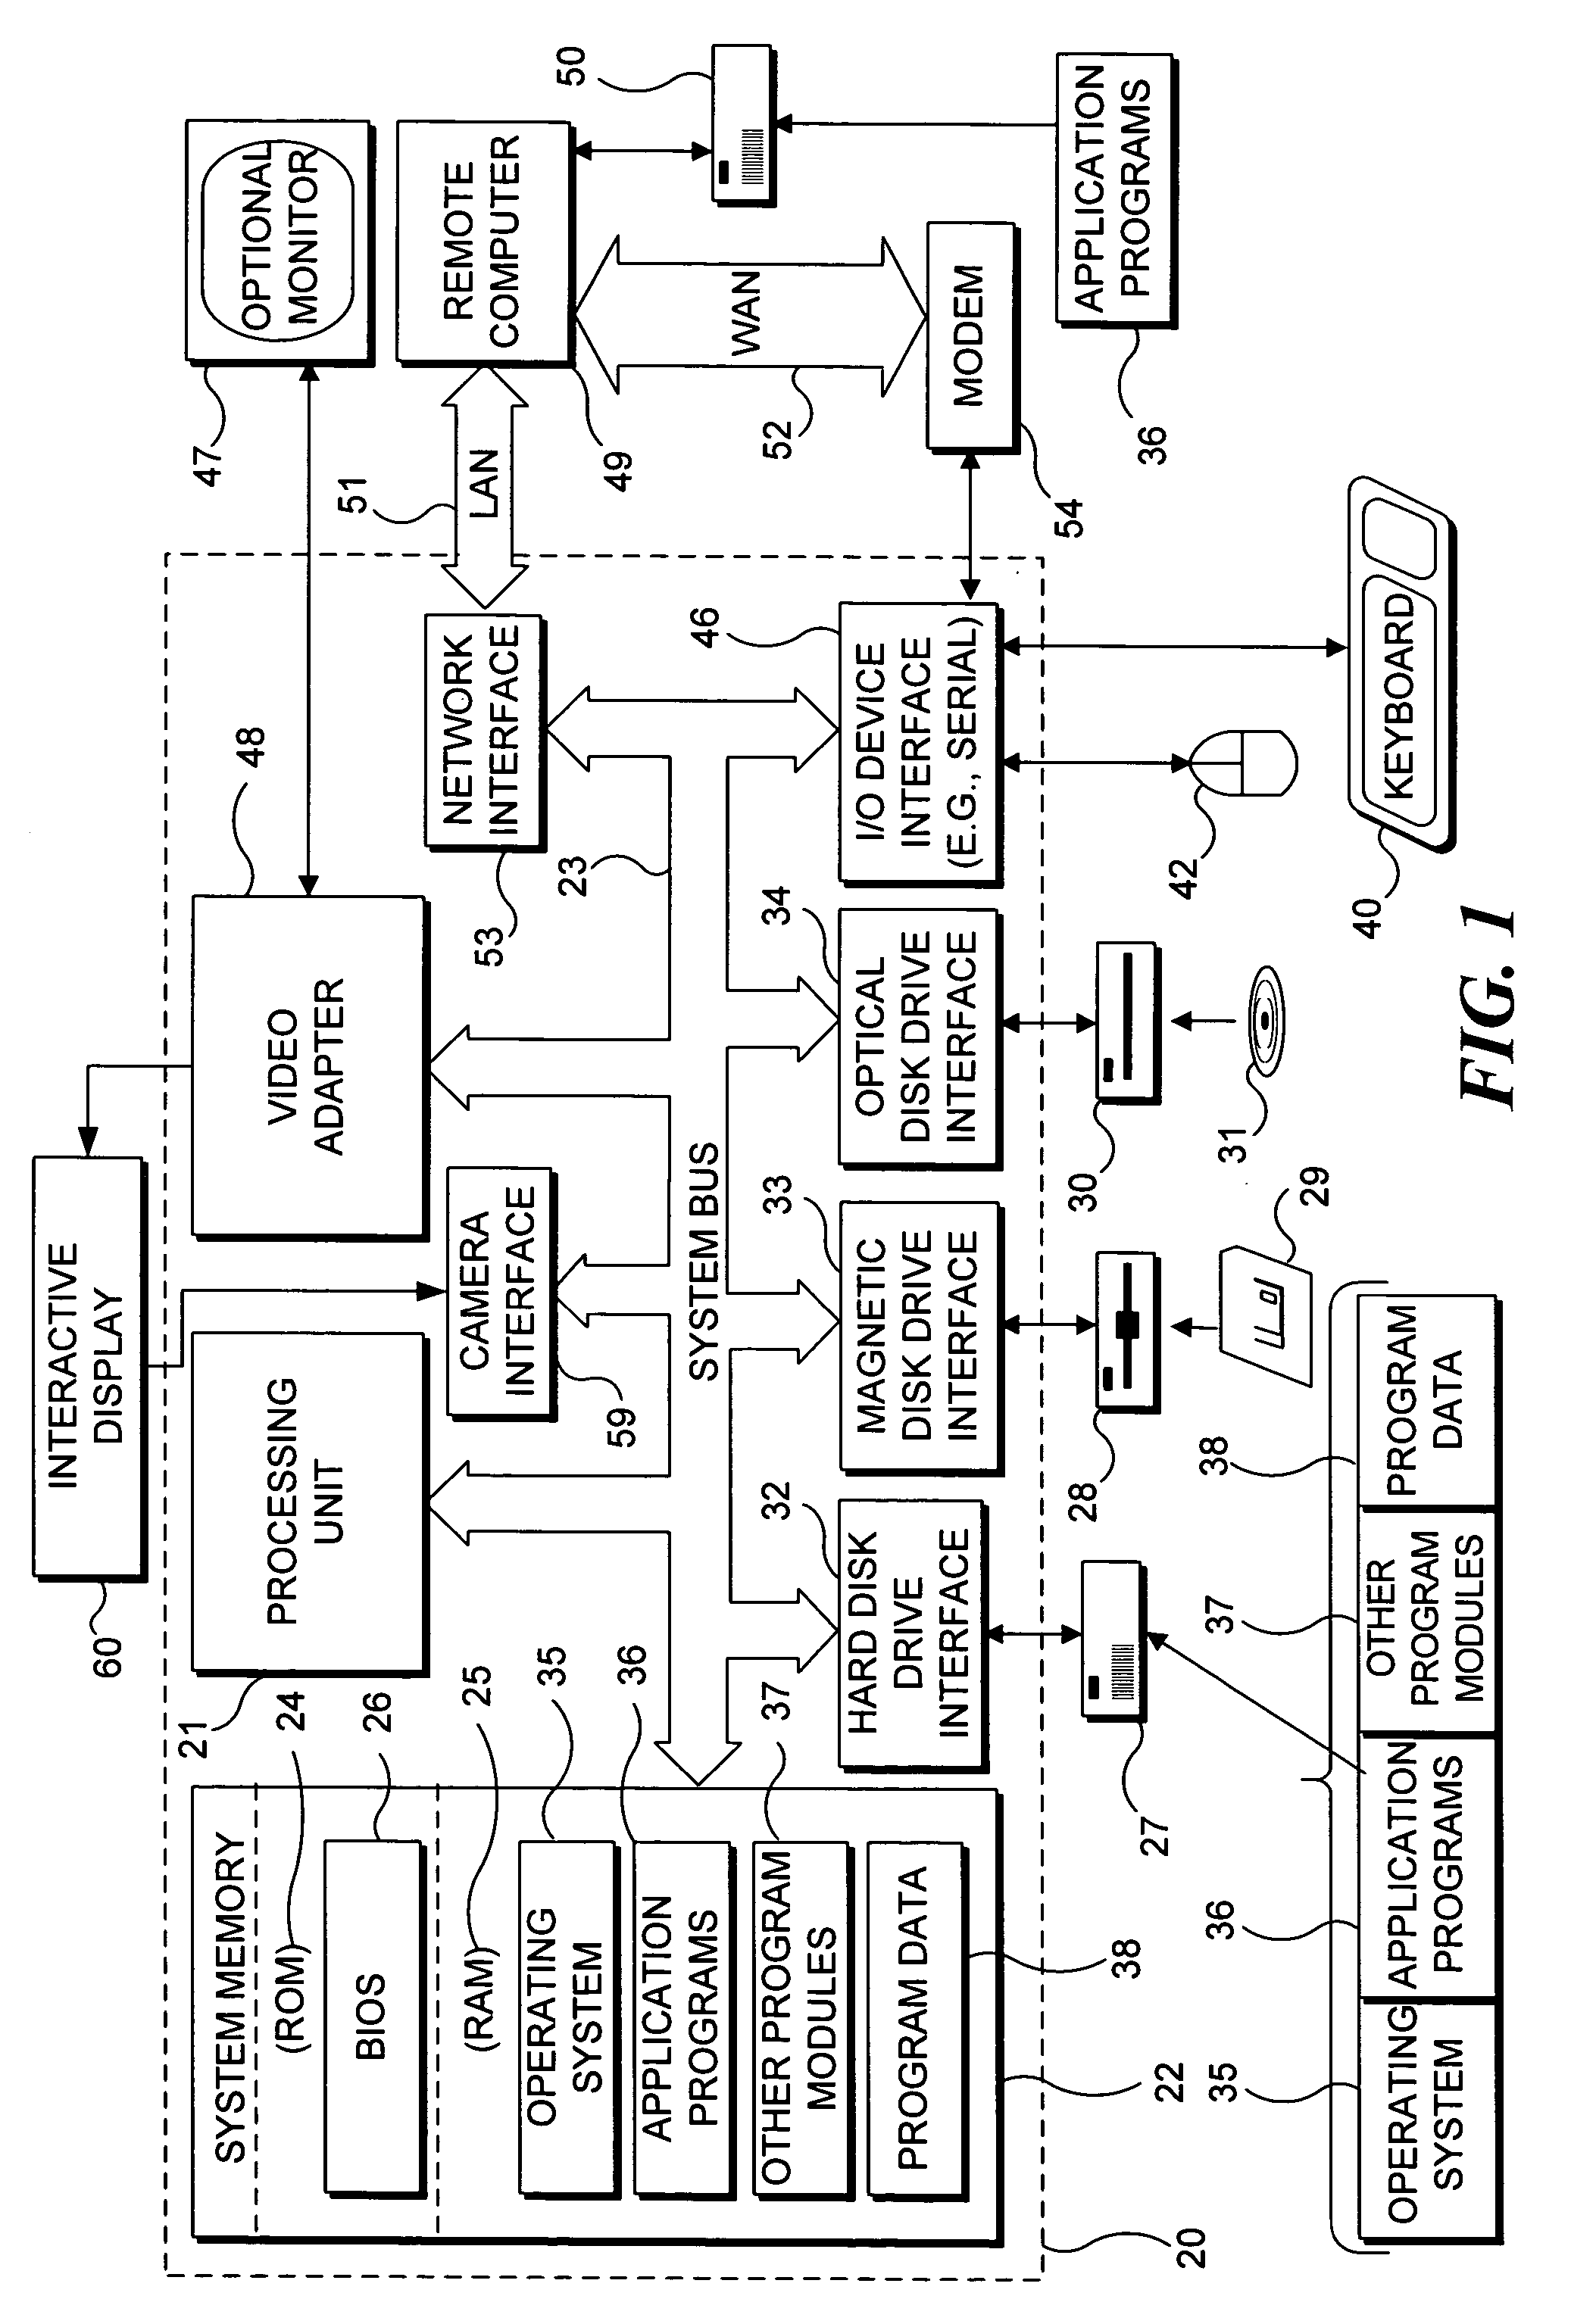 Interaction between objects and a virtual environment display